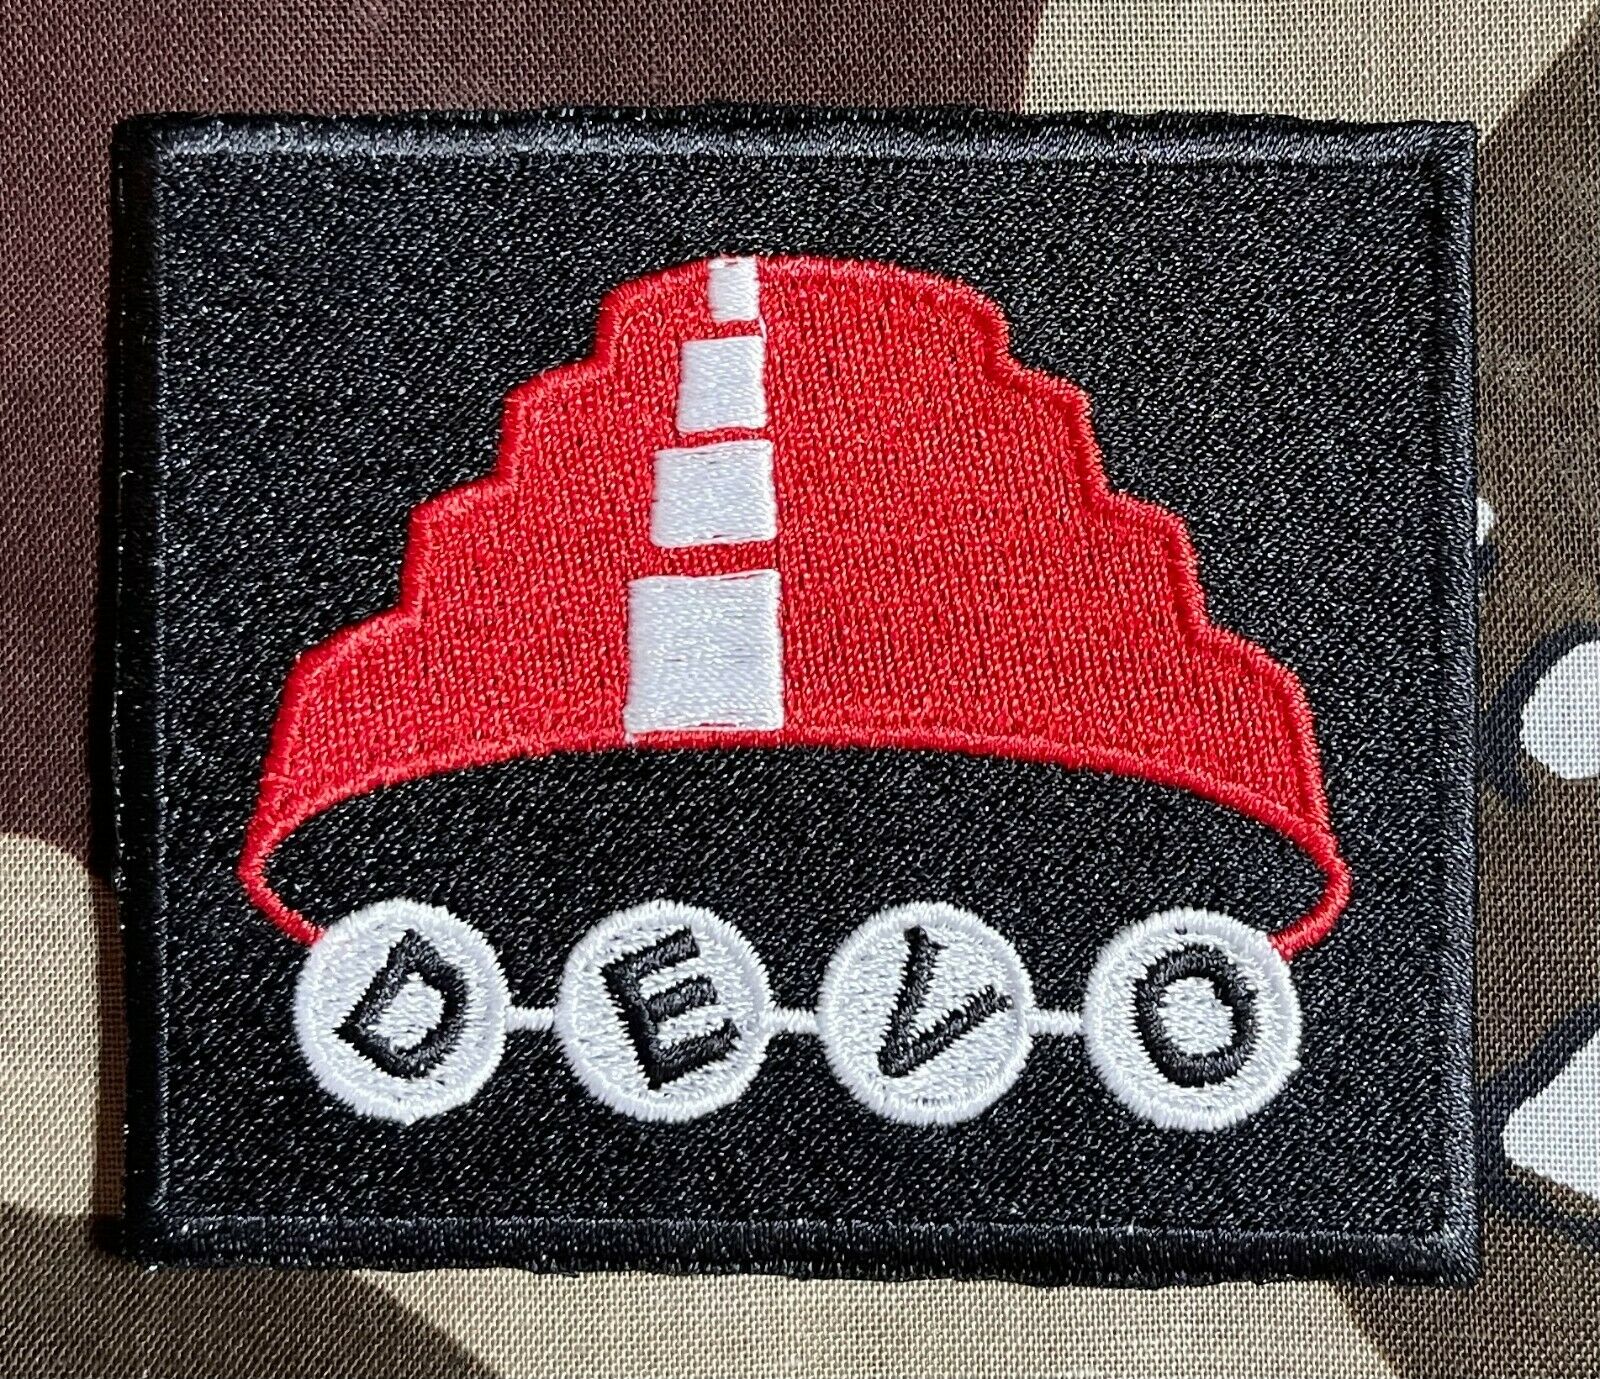 Devo Energy Dome Embroidered Patch D082p New Wave The Cramps Siouxsie Sioux